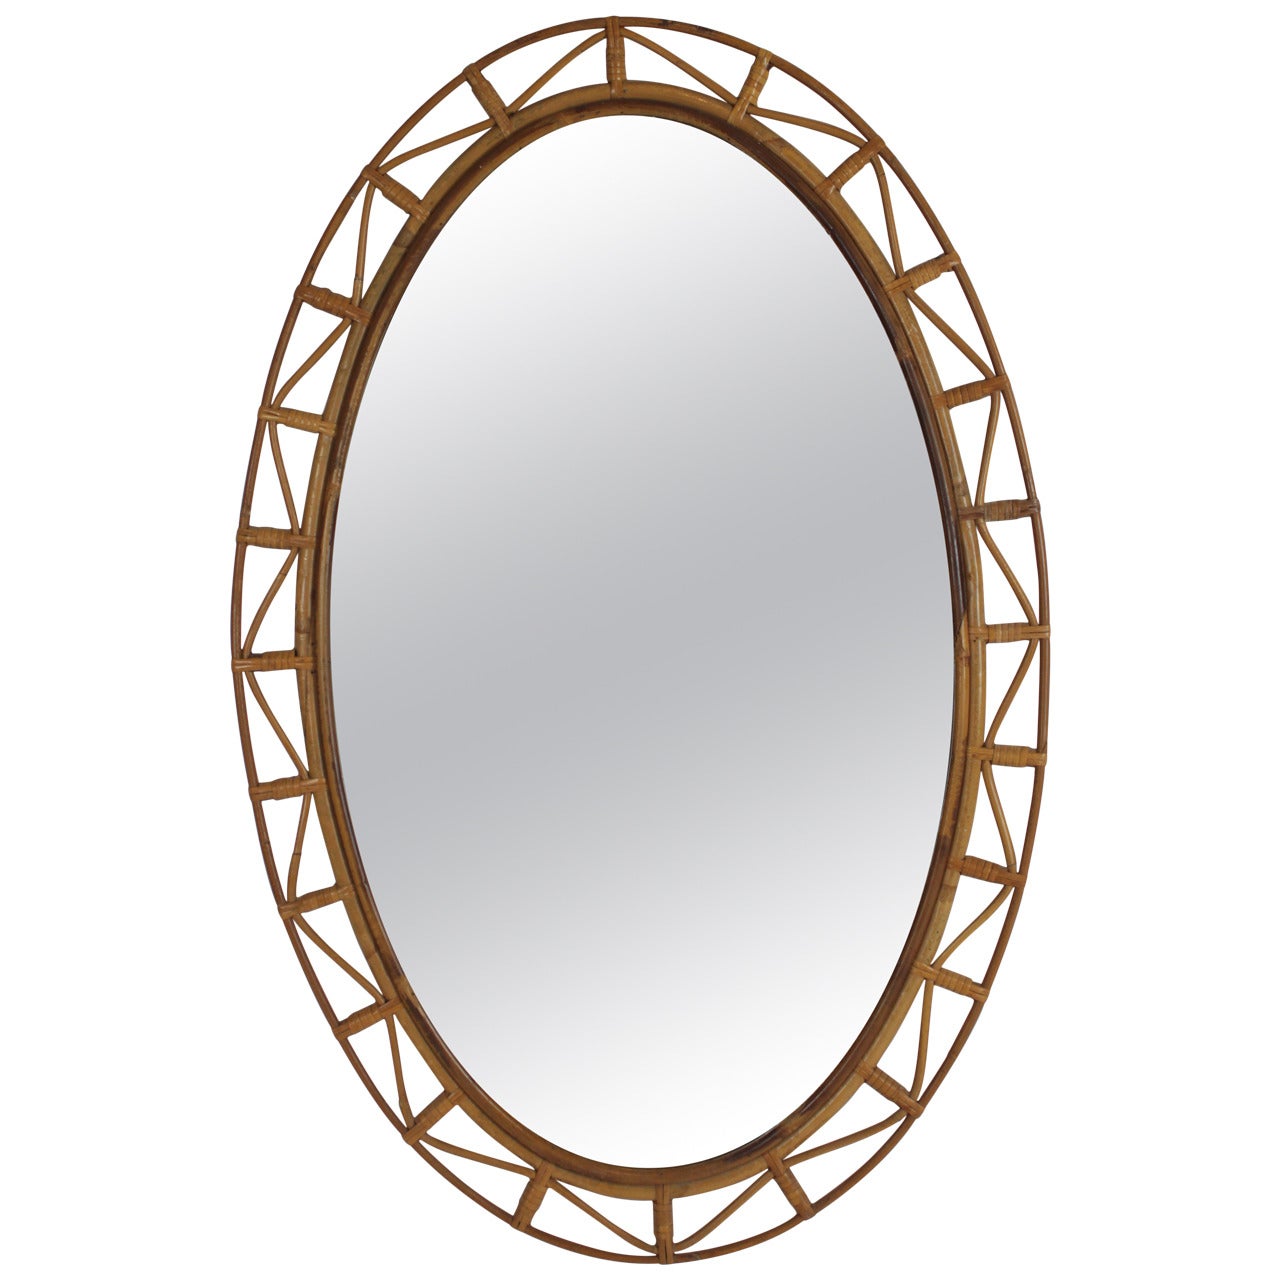 Bamboo and Wicker Oval Mirror with Geometric Design from the Coast of Cadiz